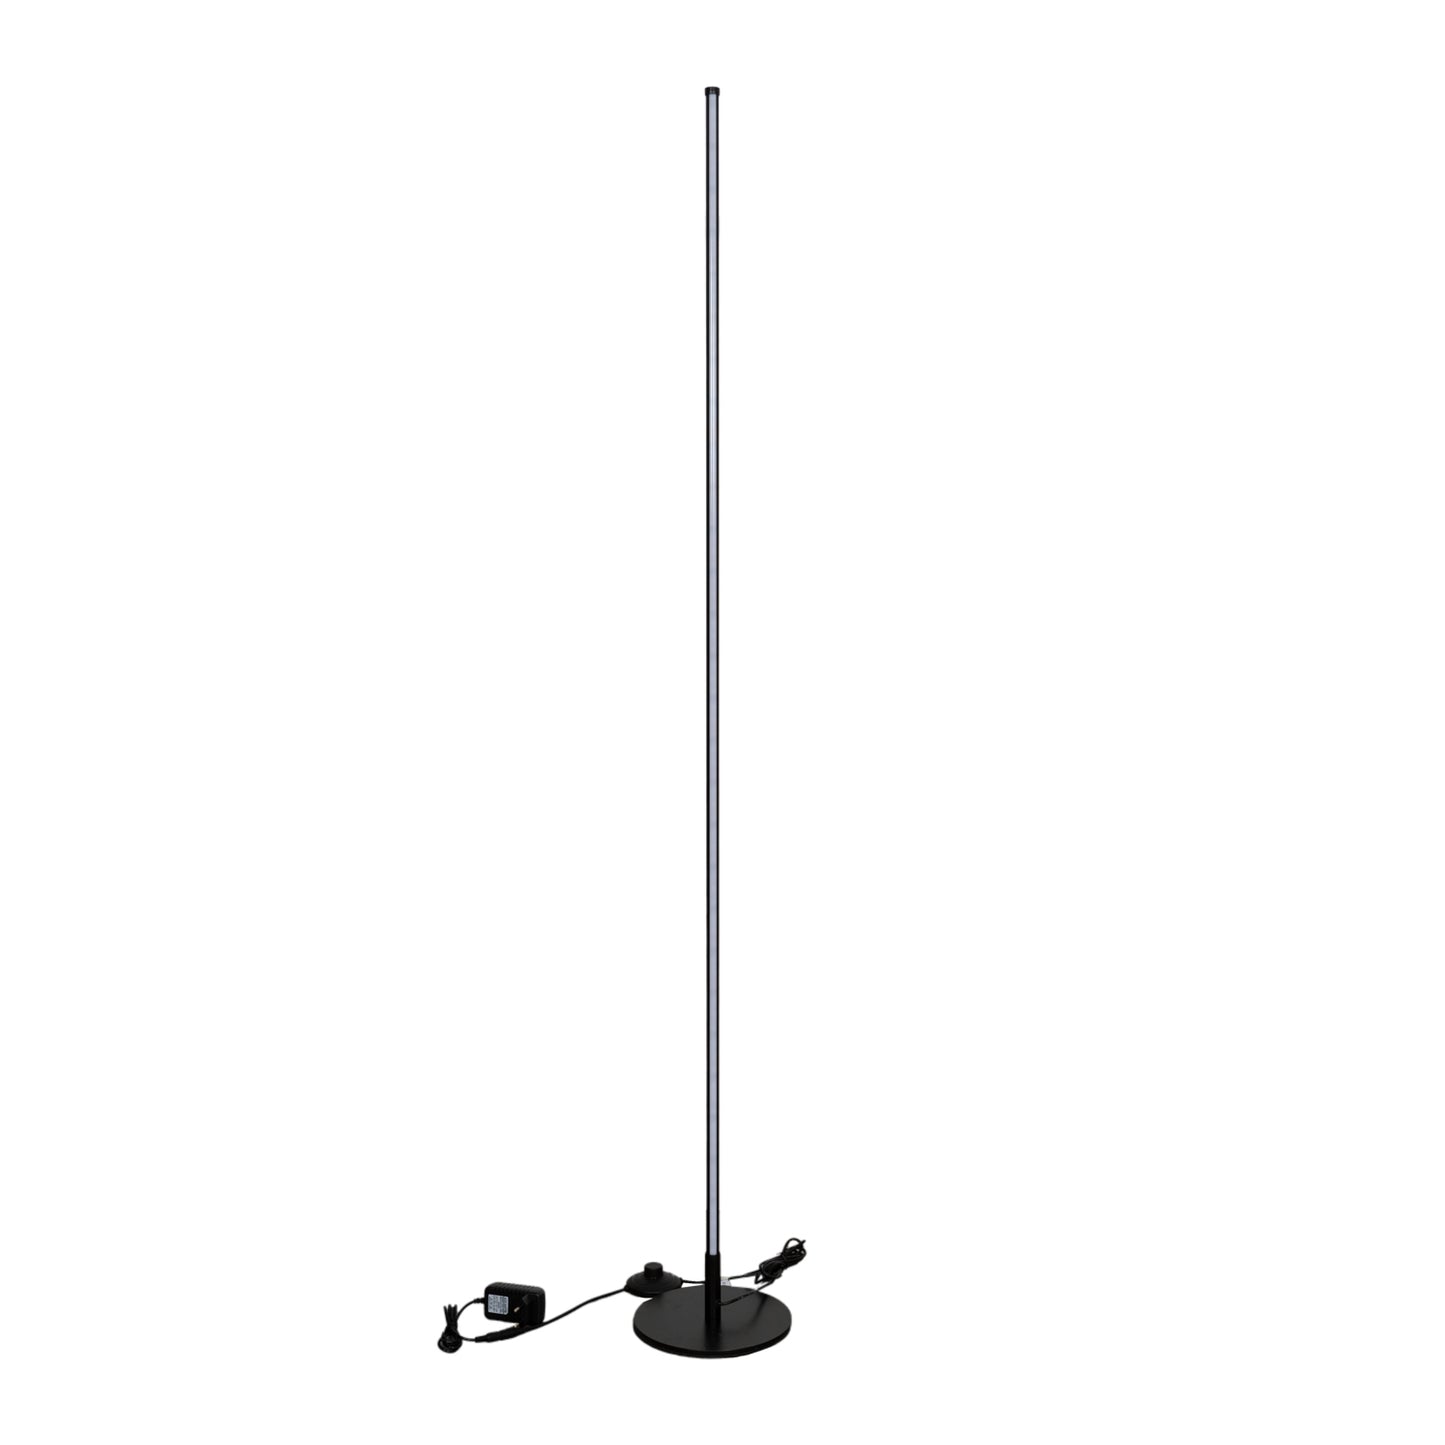 Realight RGB LED Floor Lamp 146cm dimmable Including Remote Control Black